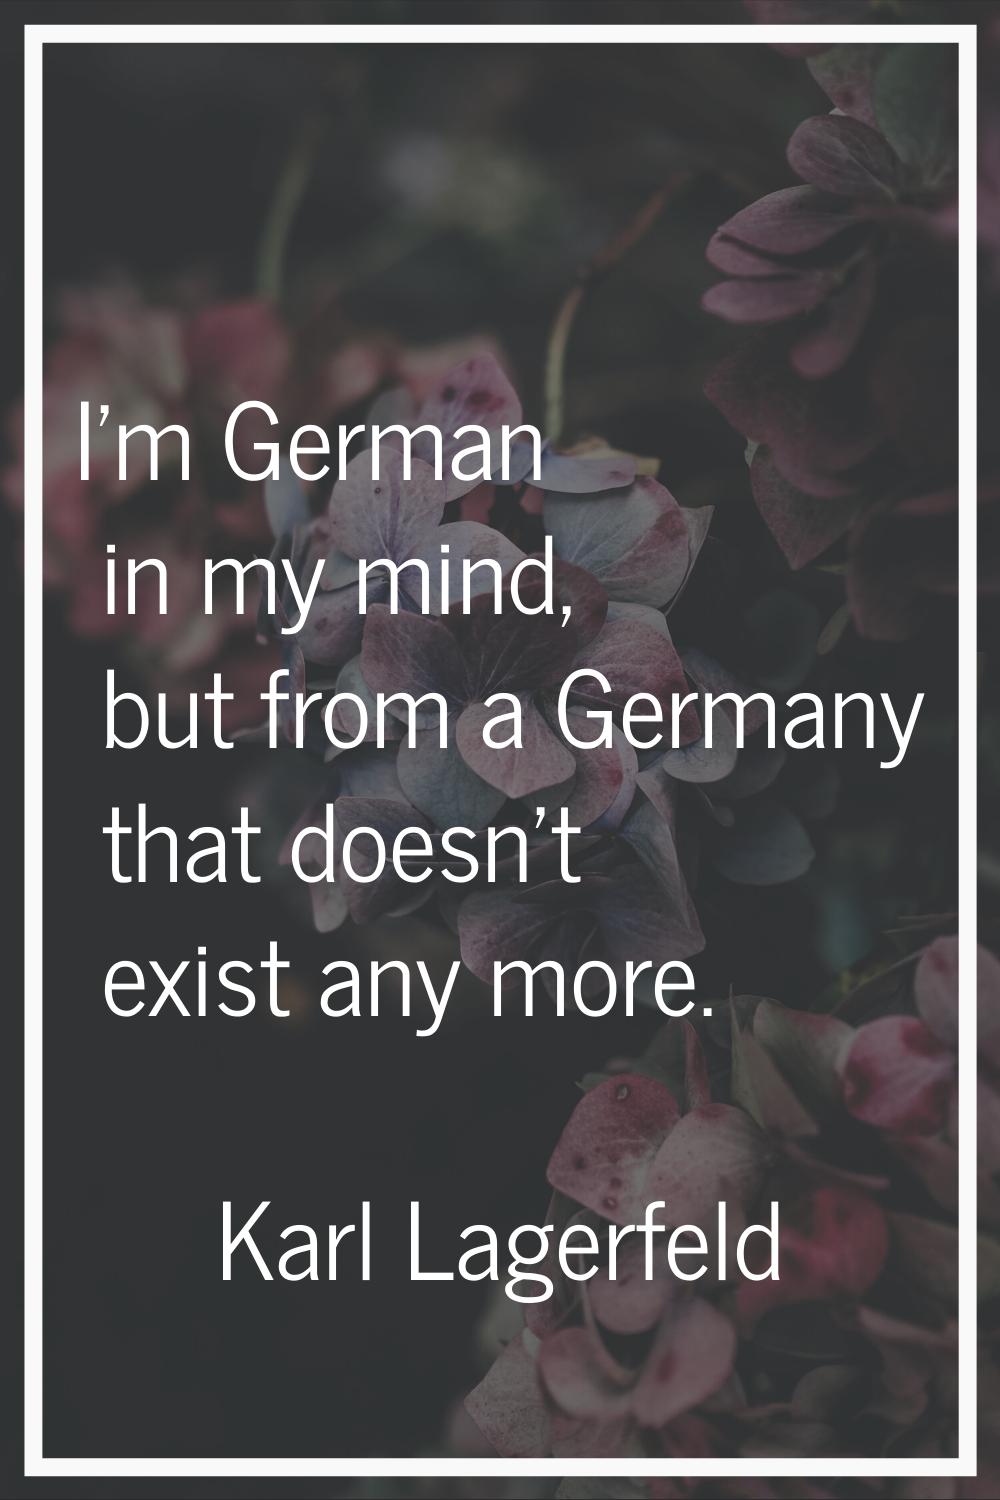 I'm German in my mind, but from a Germany that doesn't exist any more.